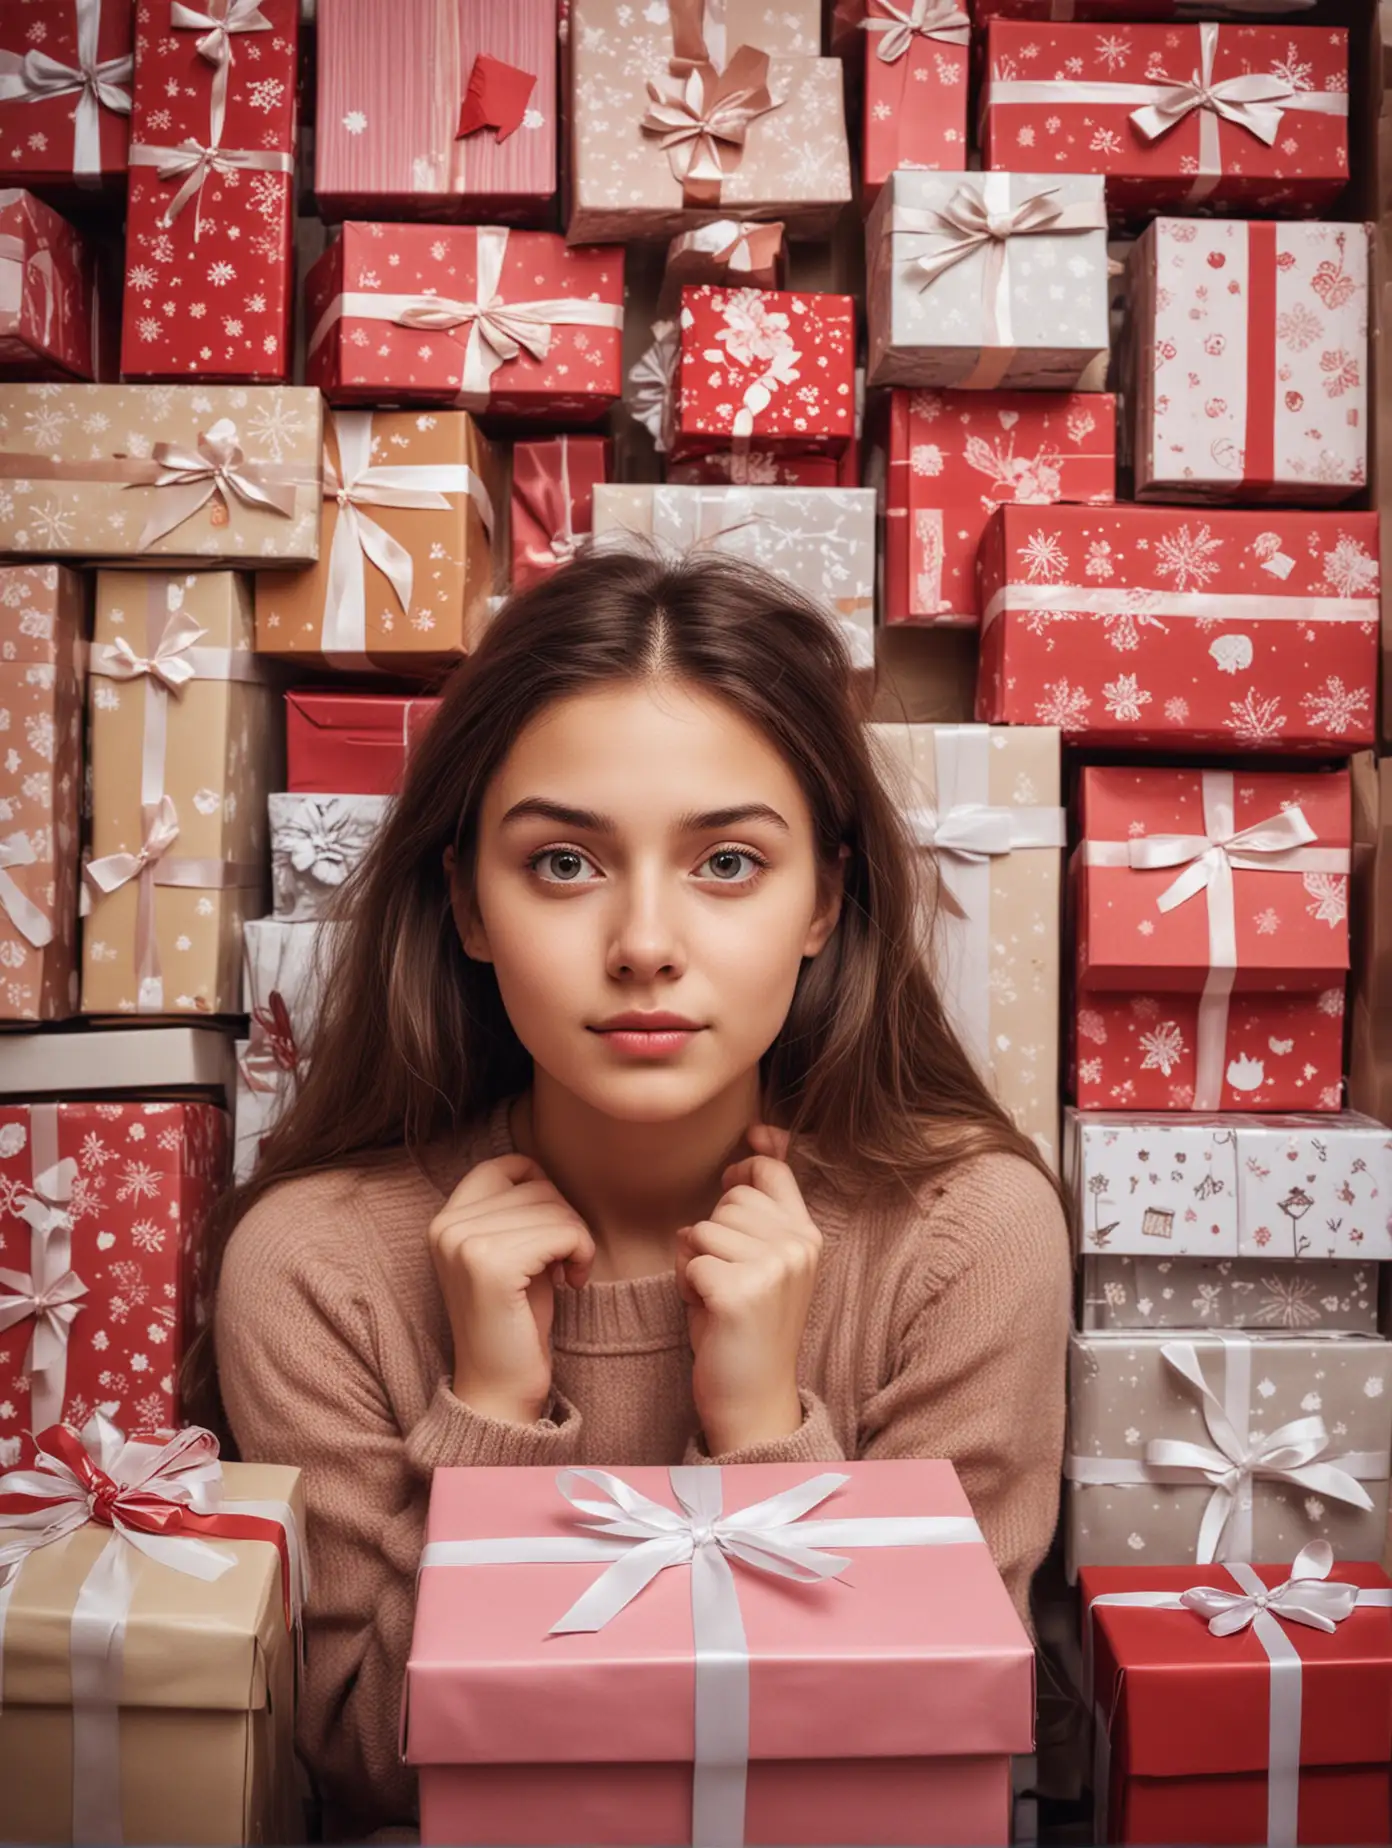 Poster of a girl thinking expression, surrounded by various gift boxes